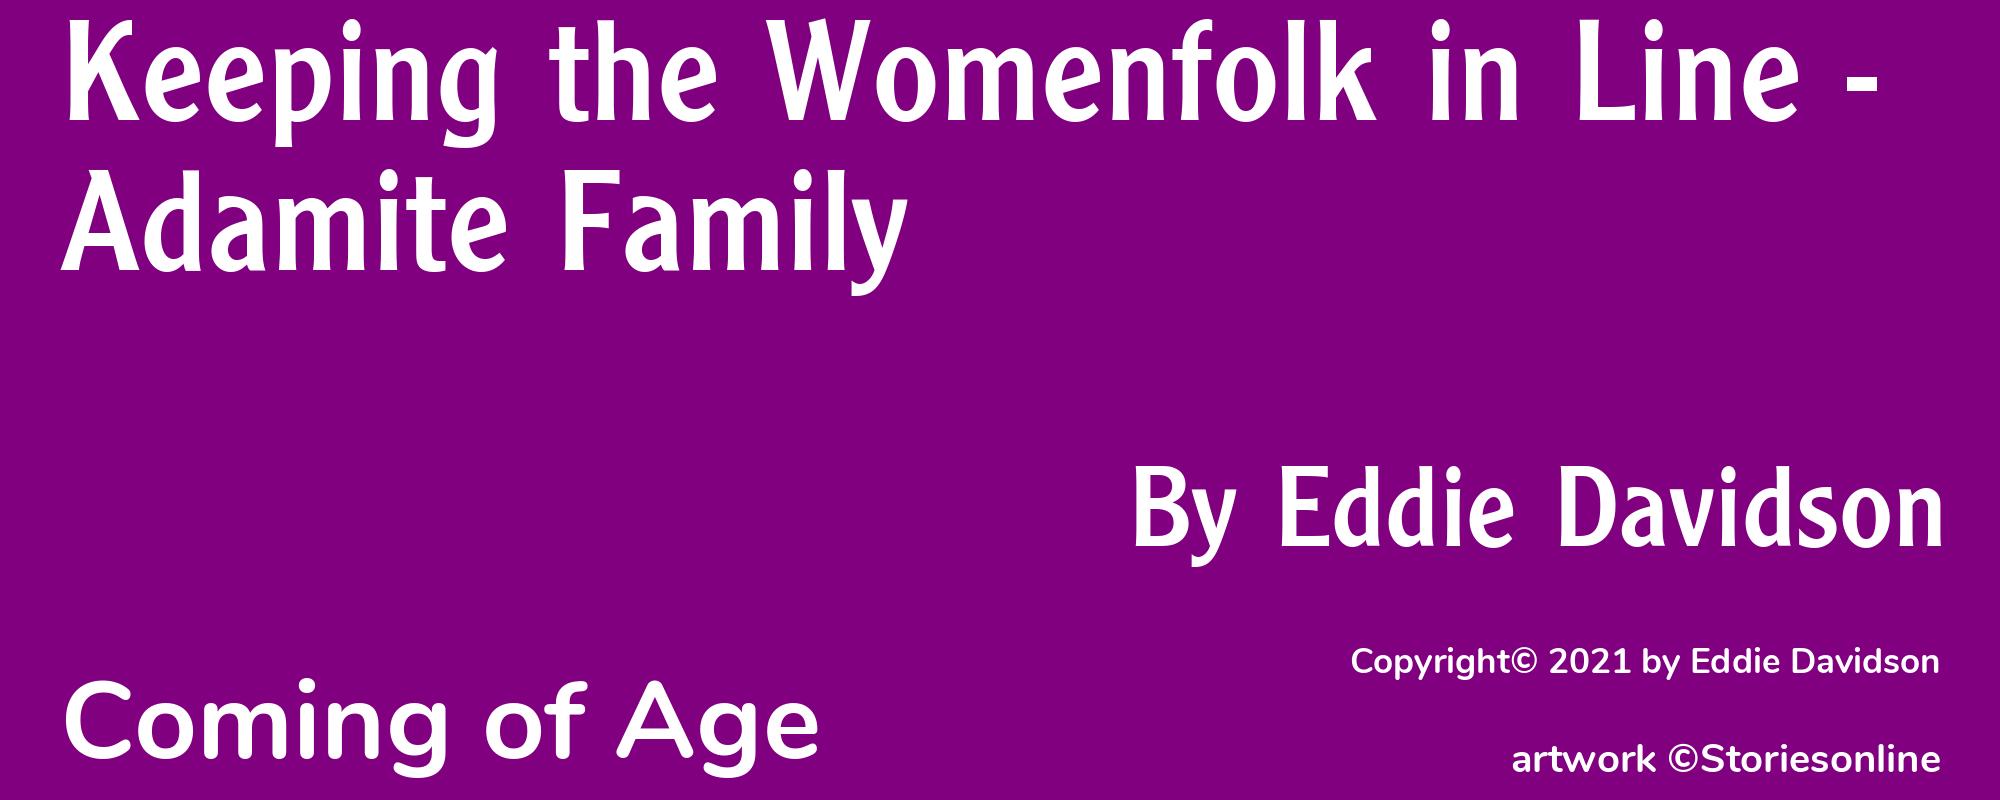 Keeping the Womenfolk in Line - Adamite Family - Cover